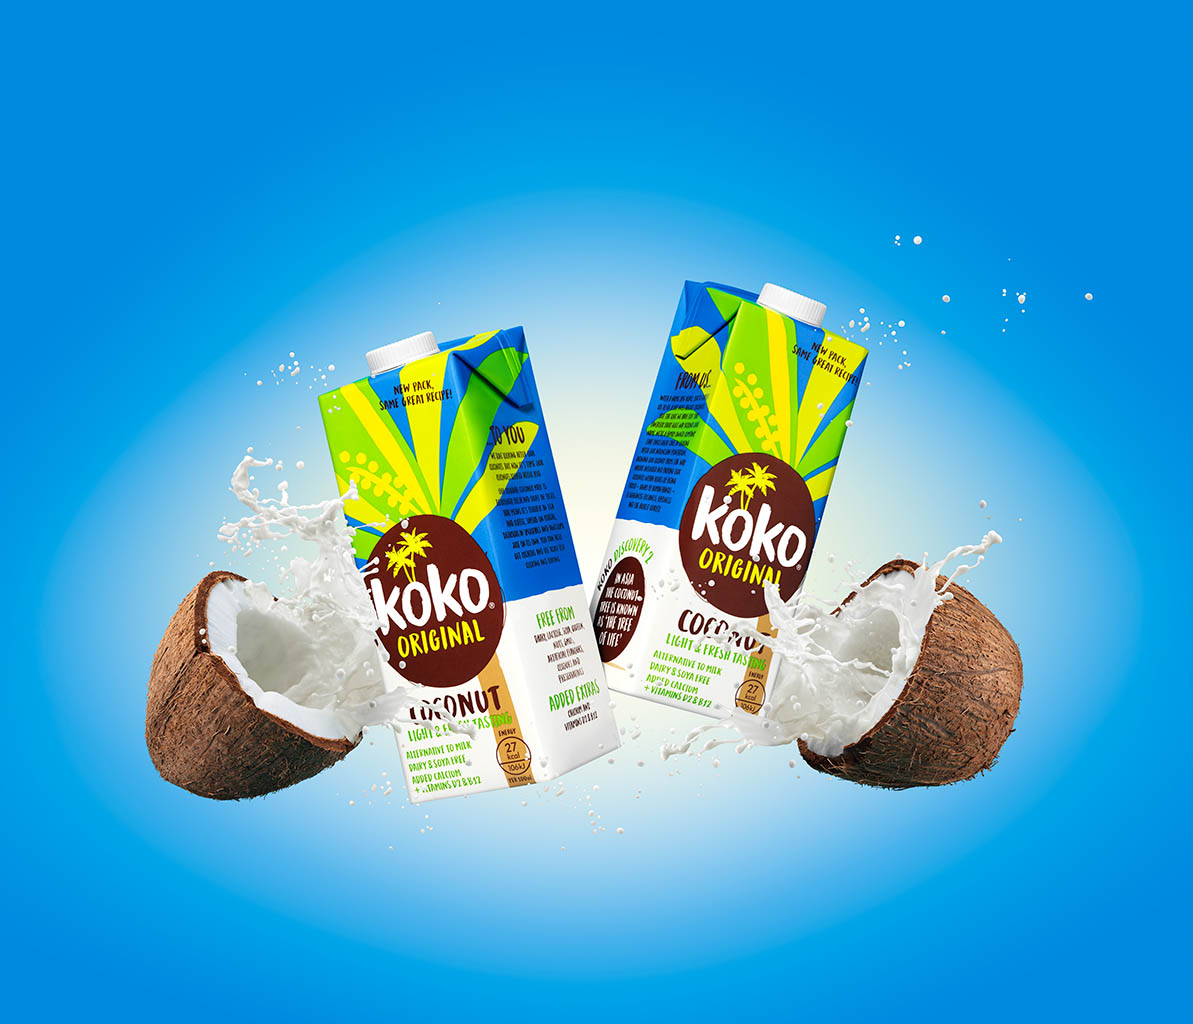 Creative Still Life Product Photography and Retouching of Koko milk cartons with smashing coconuts and milk splash by Packshot Factory